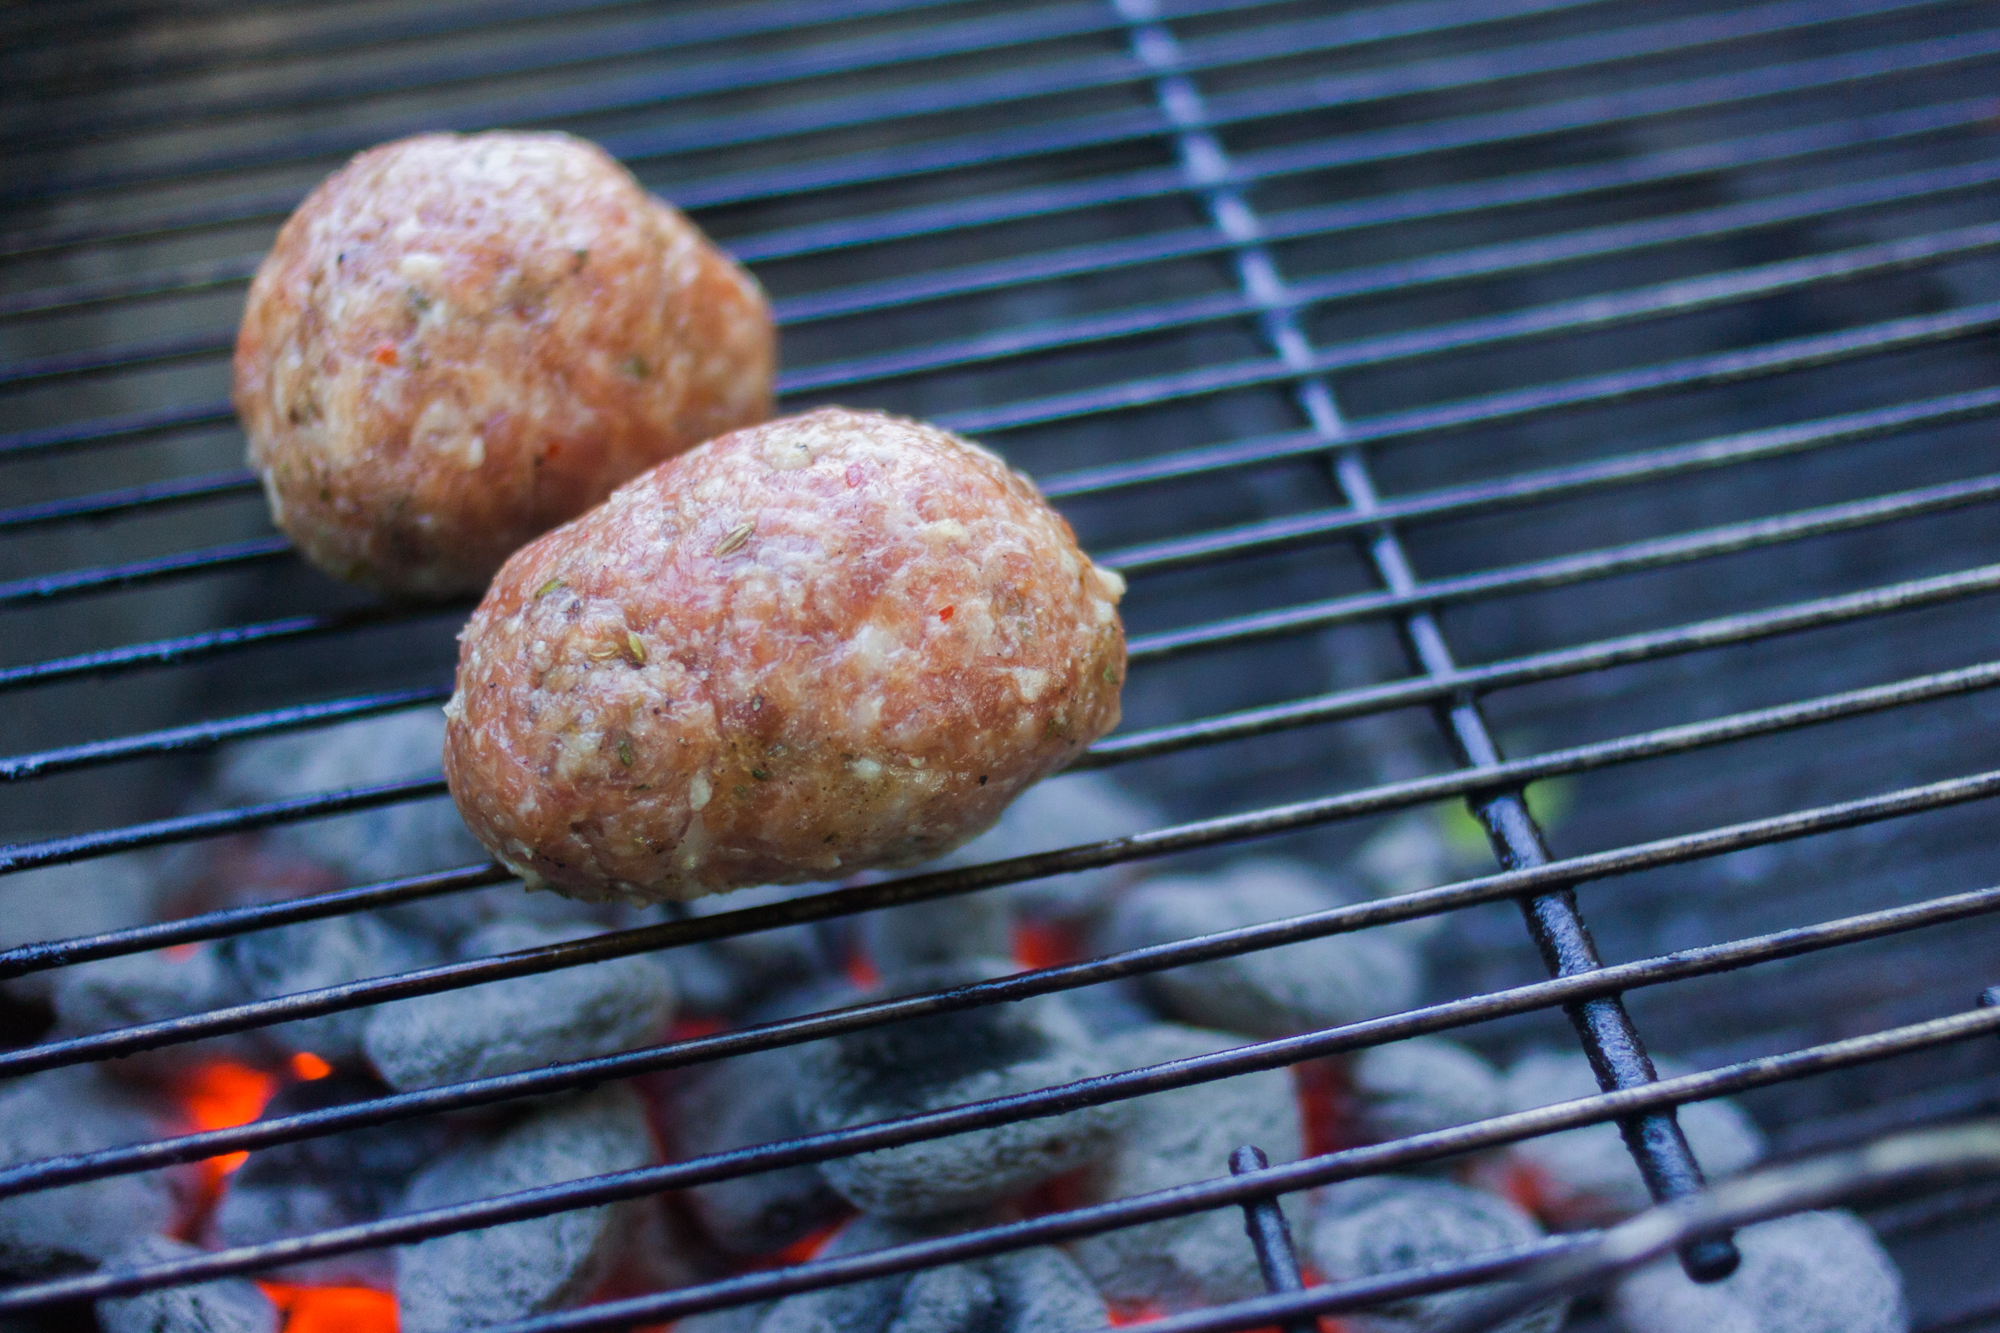 Scotch eggs on the grill